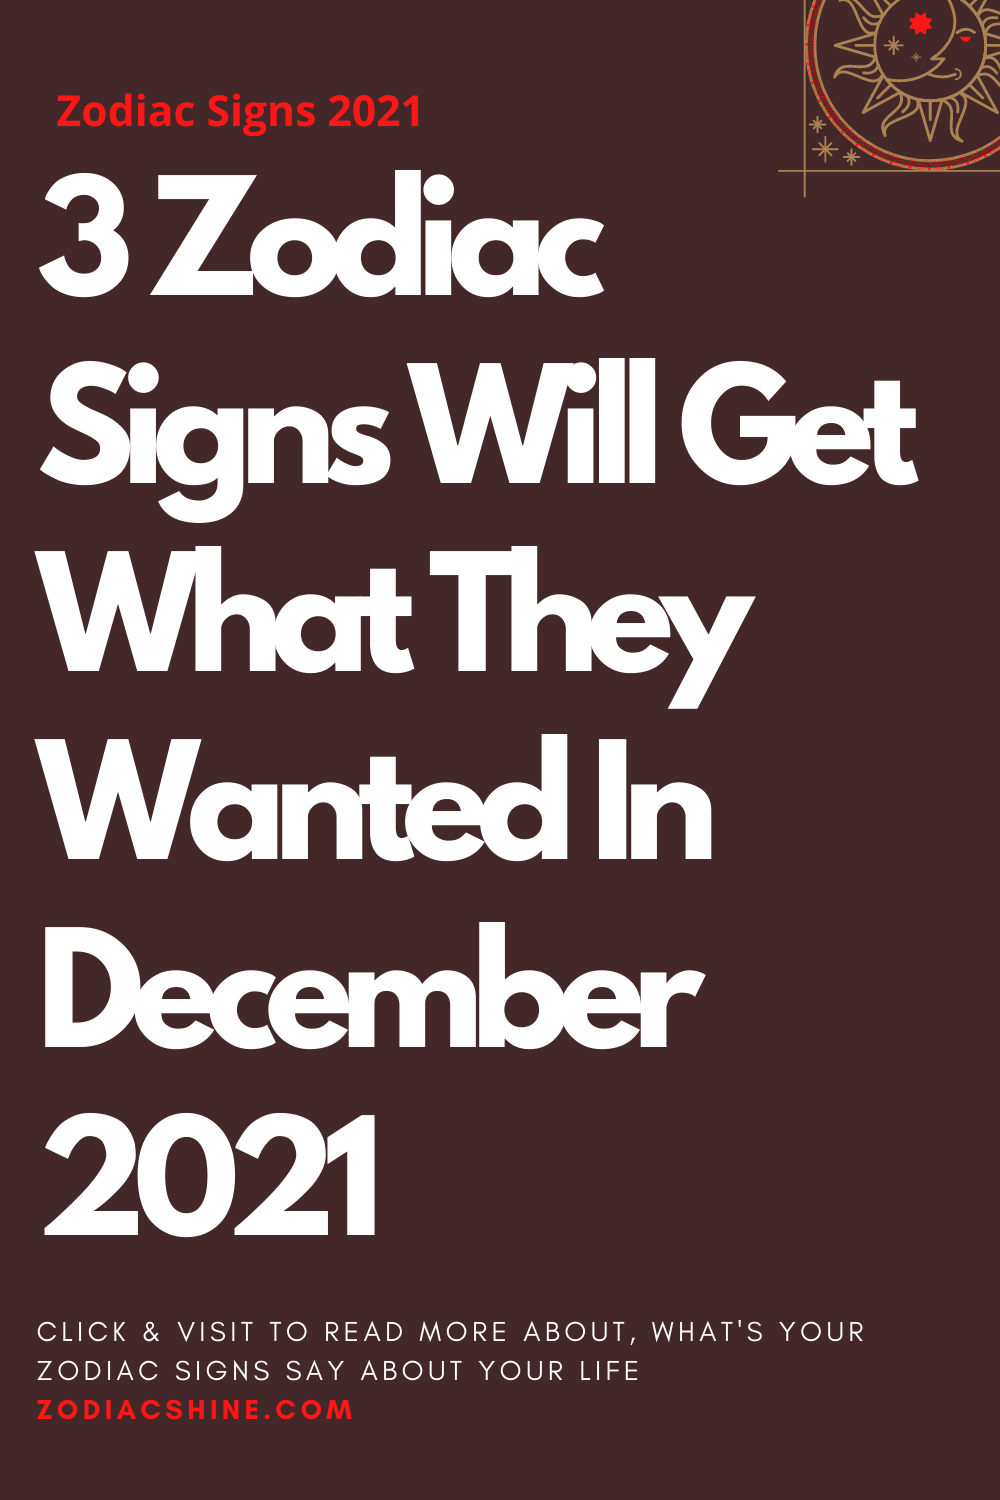 3 Zodiac Signs Will Get What They Wanted In December 2021